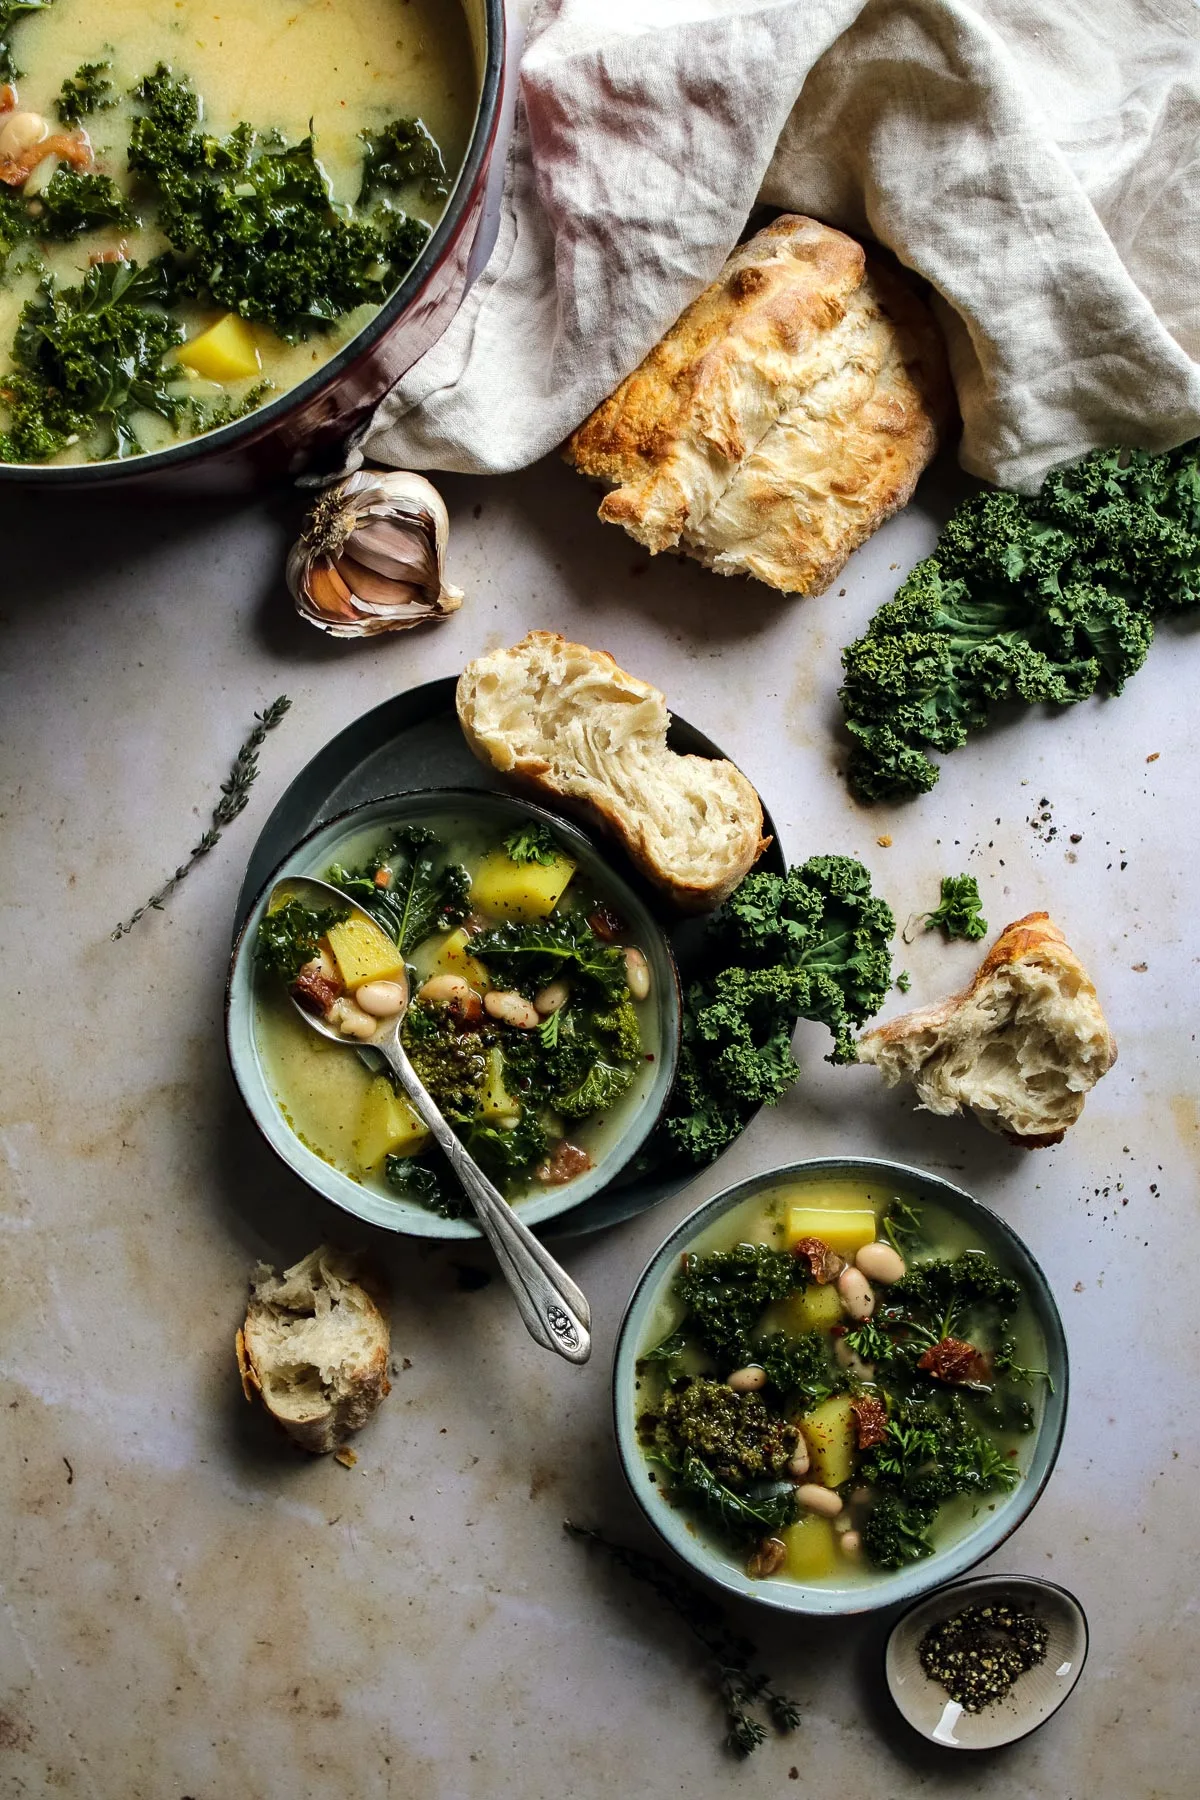 Vegan Zuppa Toscana in bowls with bread.